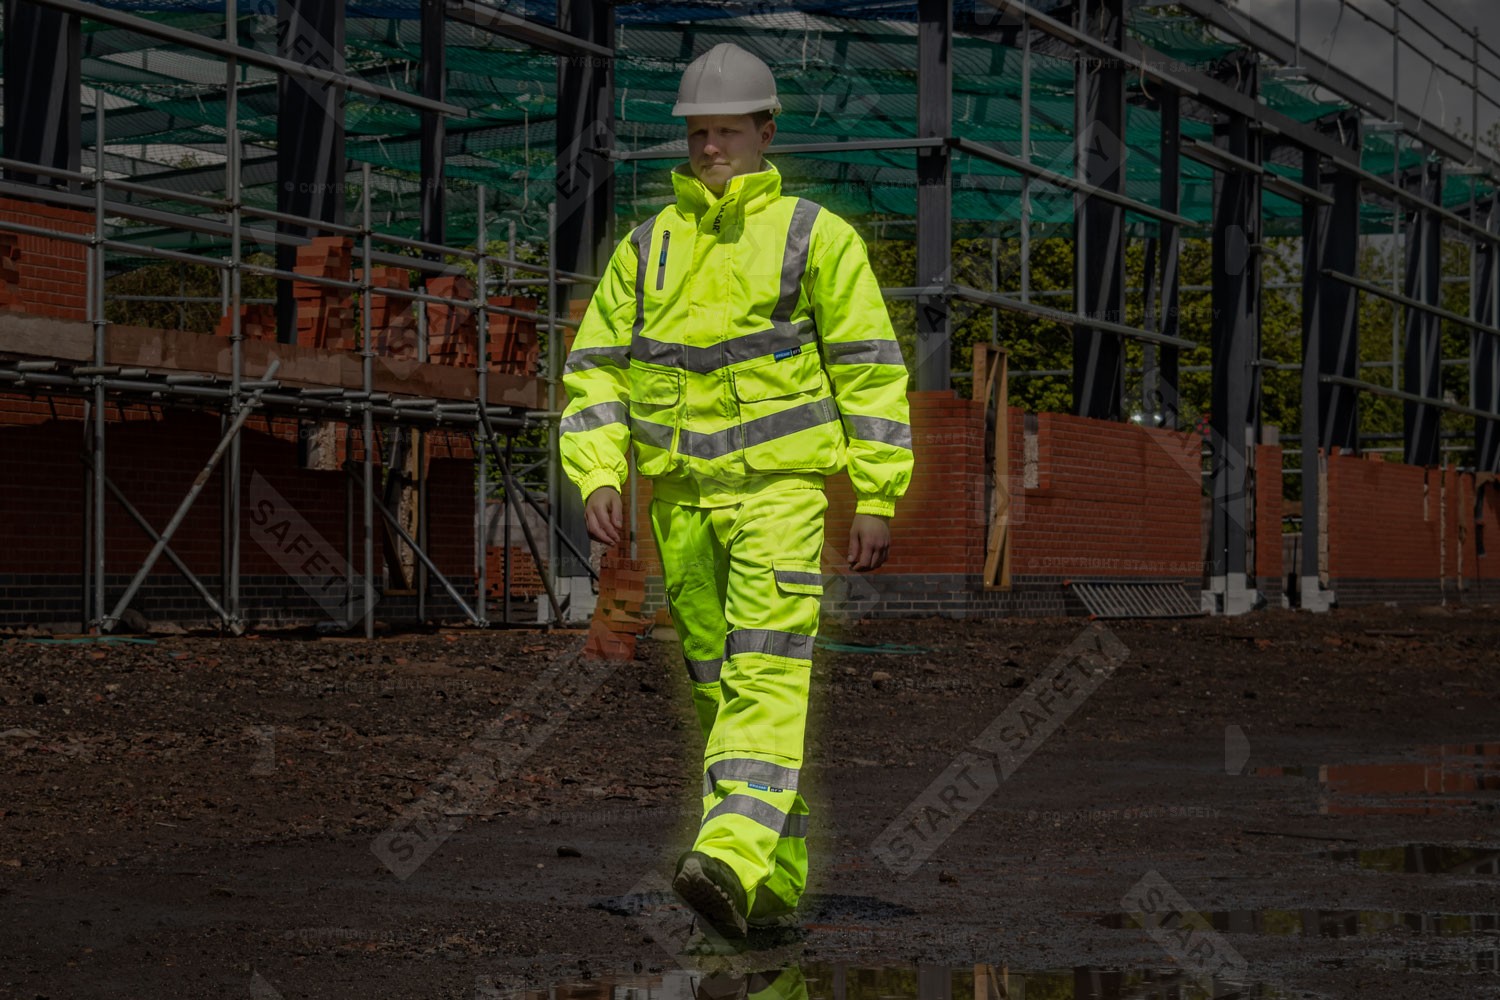 Worker With Vibrant and Highly Reflective Clothing